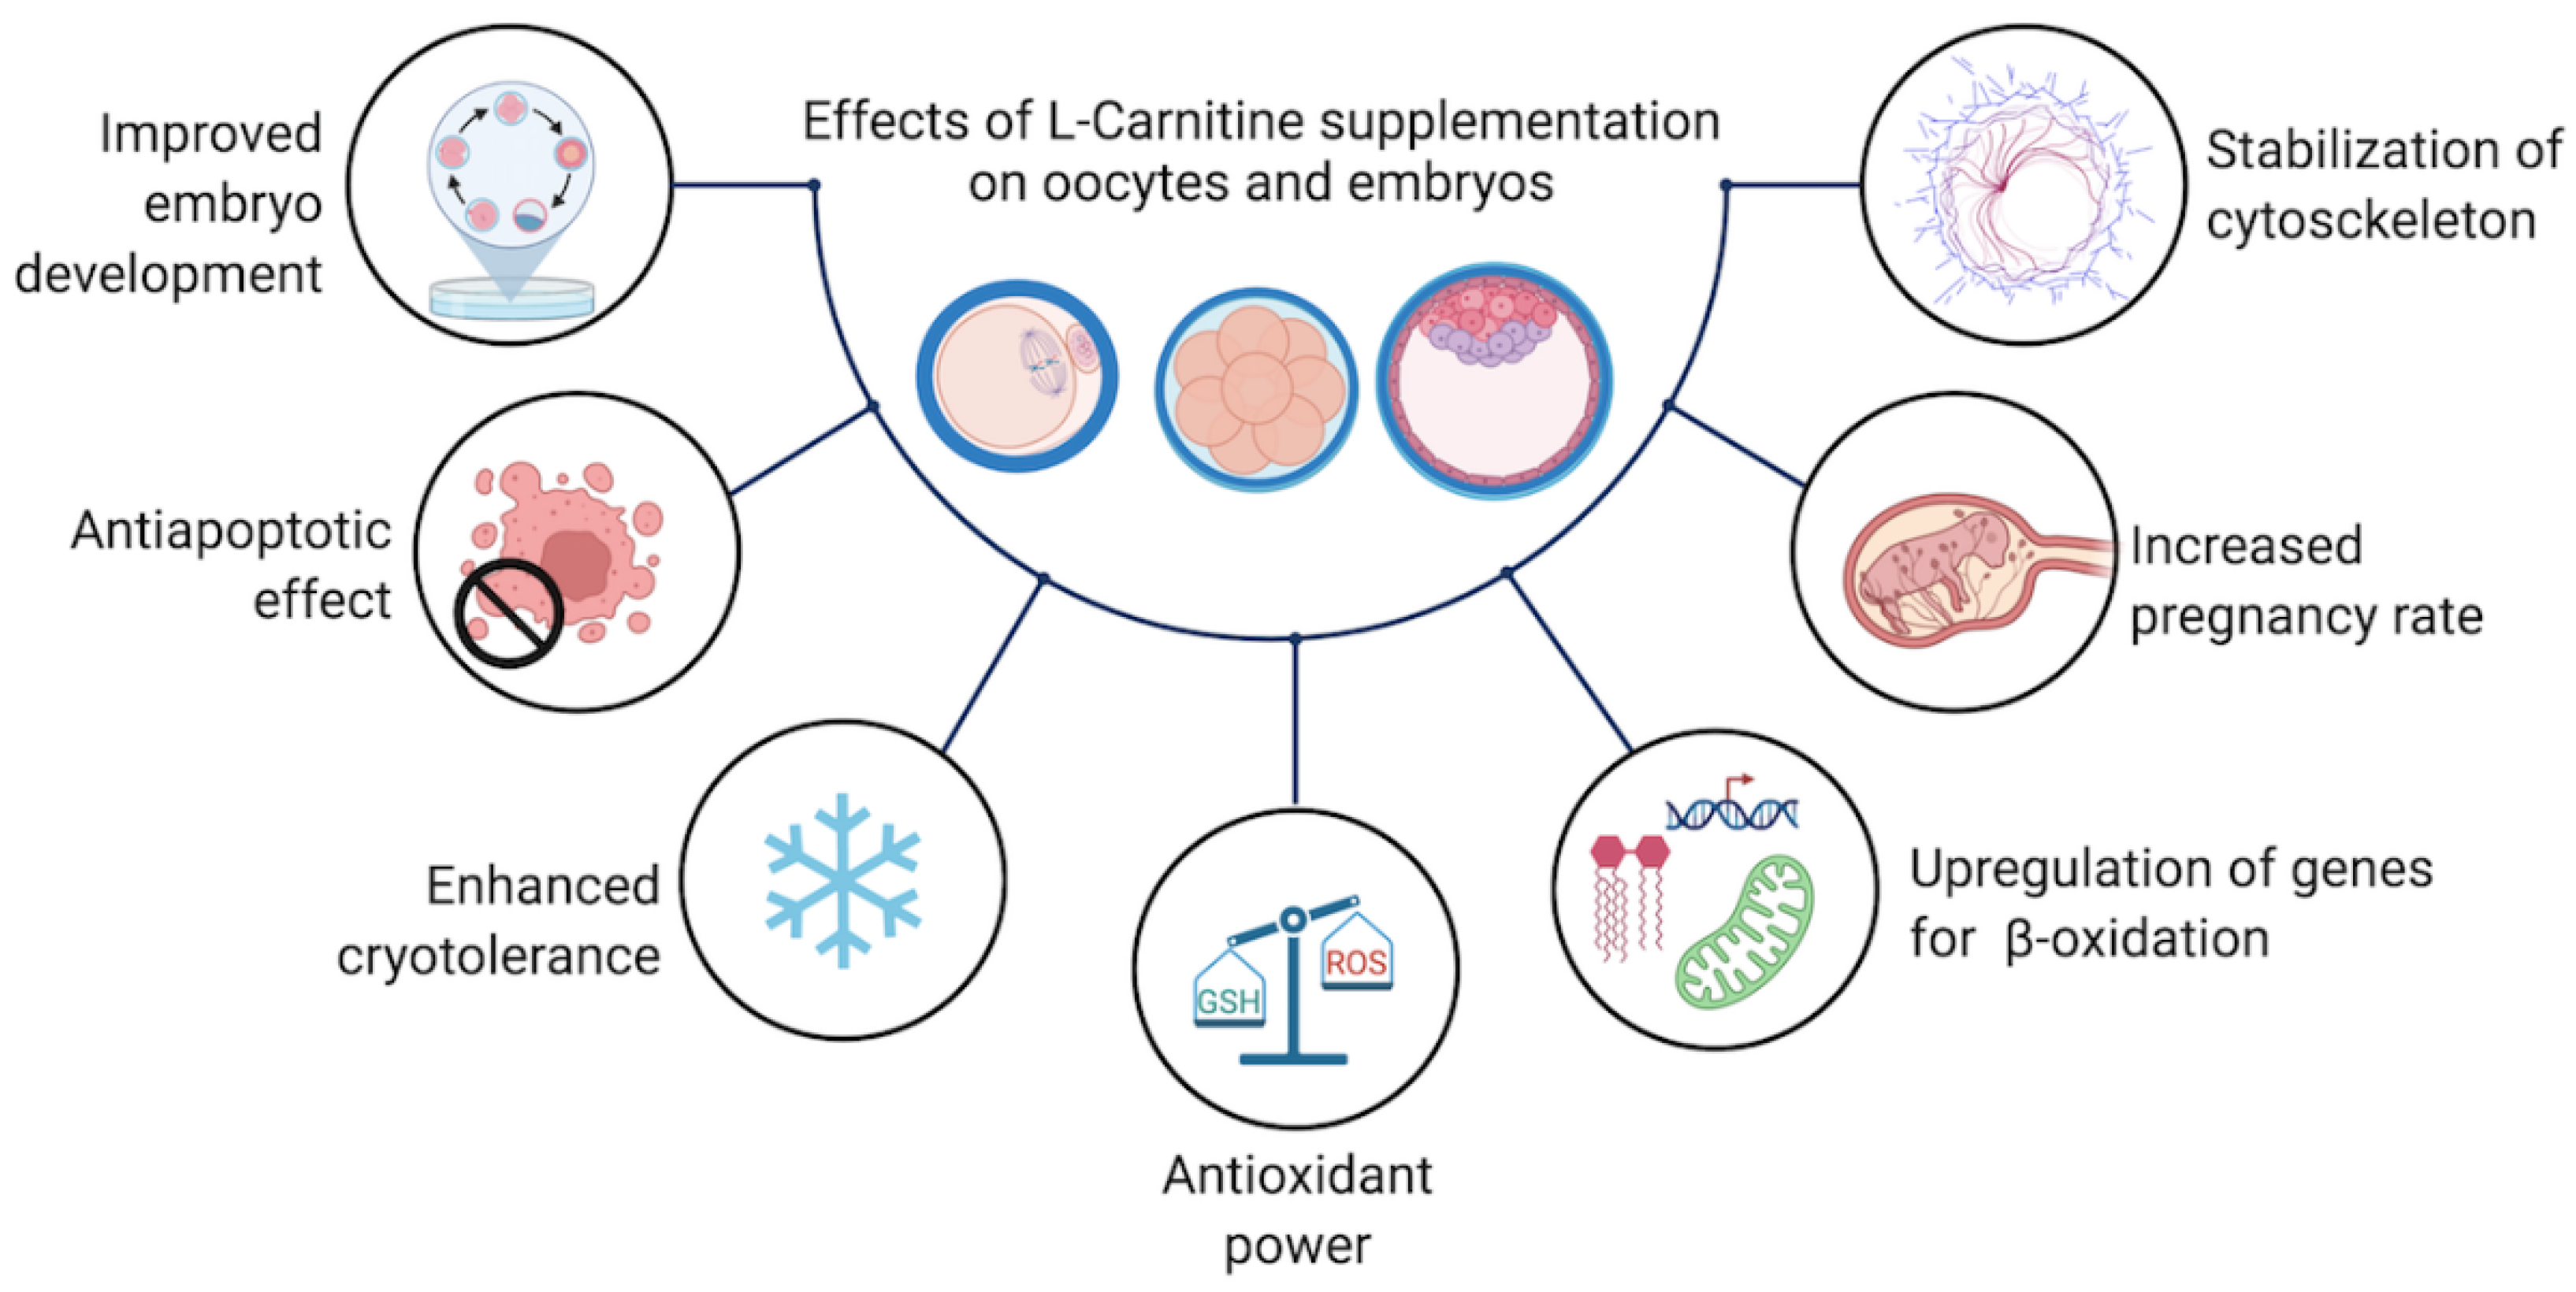 L-carnitine and antioxidant activity